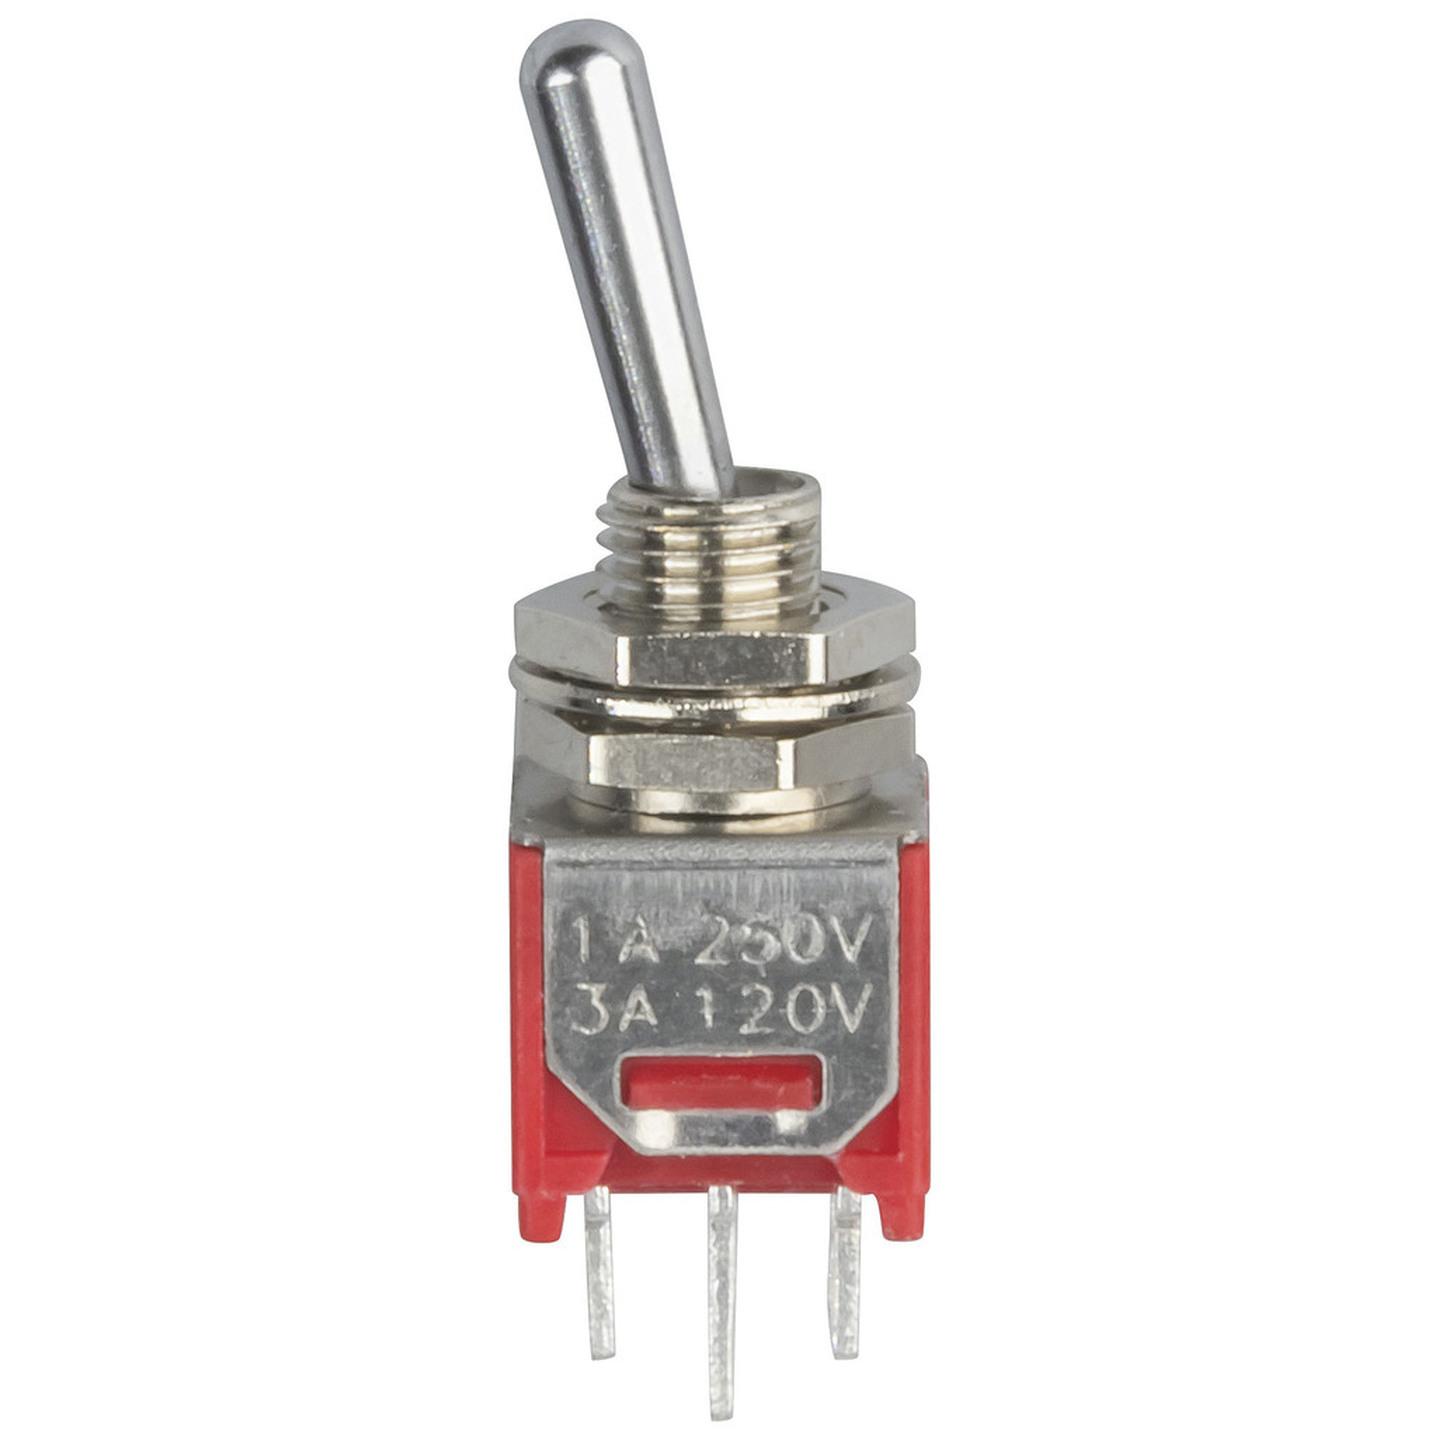 DPDT Sub-Miniature Toggle Switch - Solder Tag